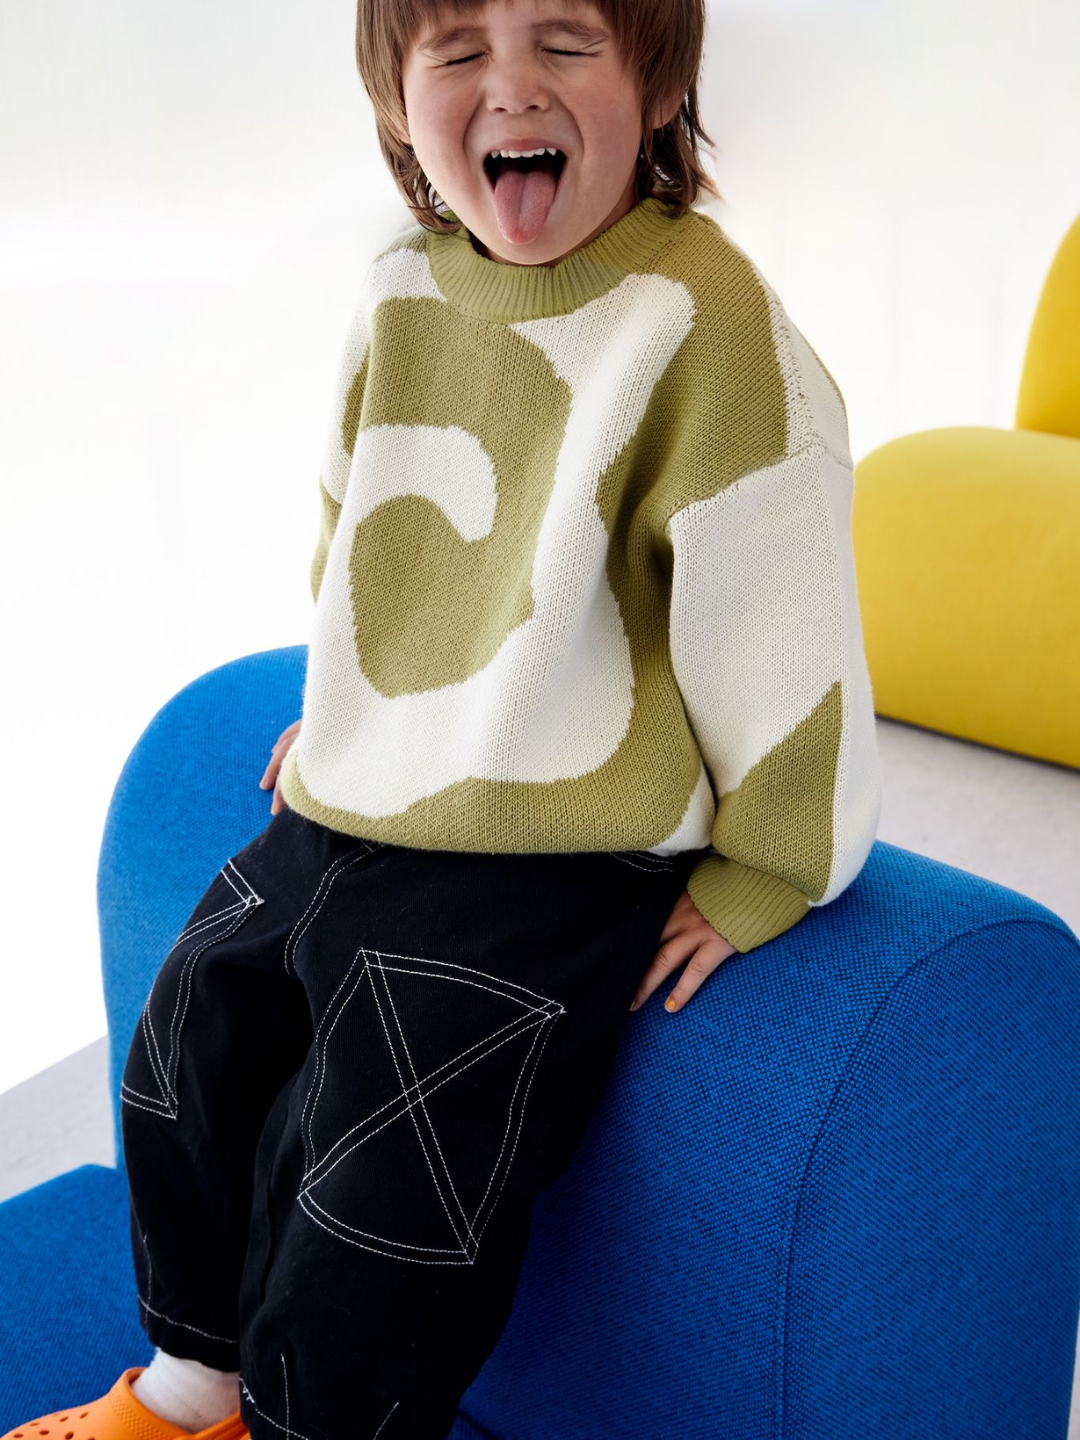 Sage | A child wearing a kids crewneck sweater in sage green, with a large single cream swirl design that covers the entire sweater. He is sticking his tongue out, with eyes closed, and sits on a blue chair. He wears black jeans with white stitching and orange shoes.